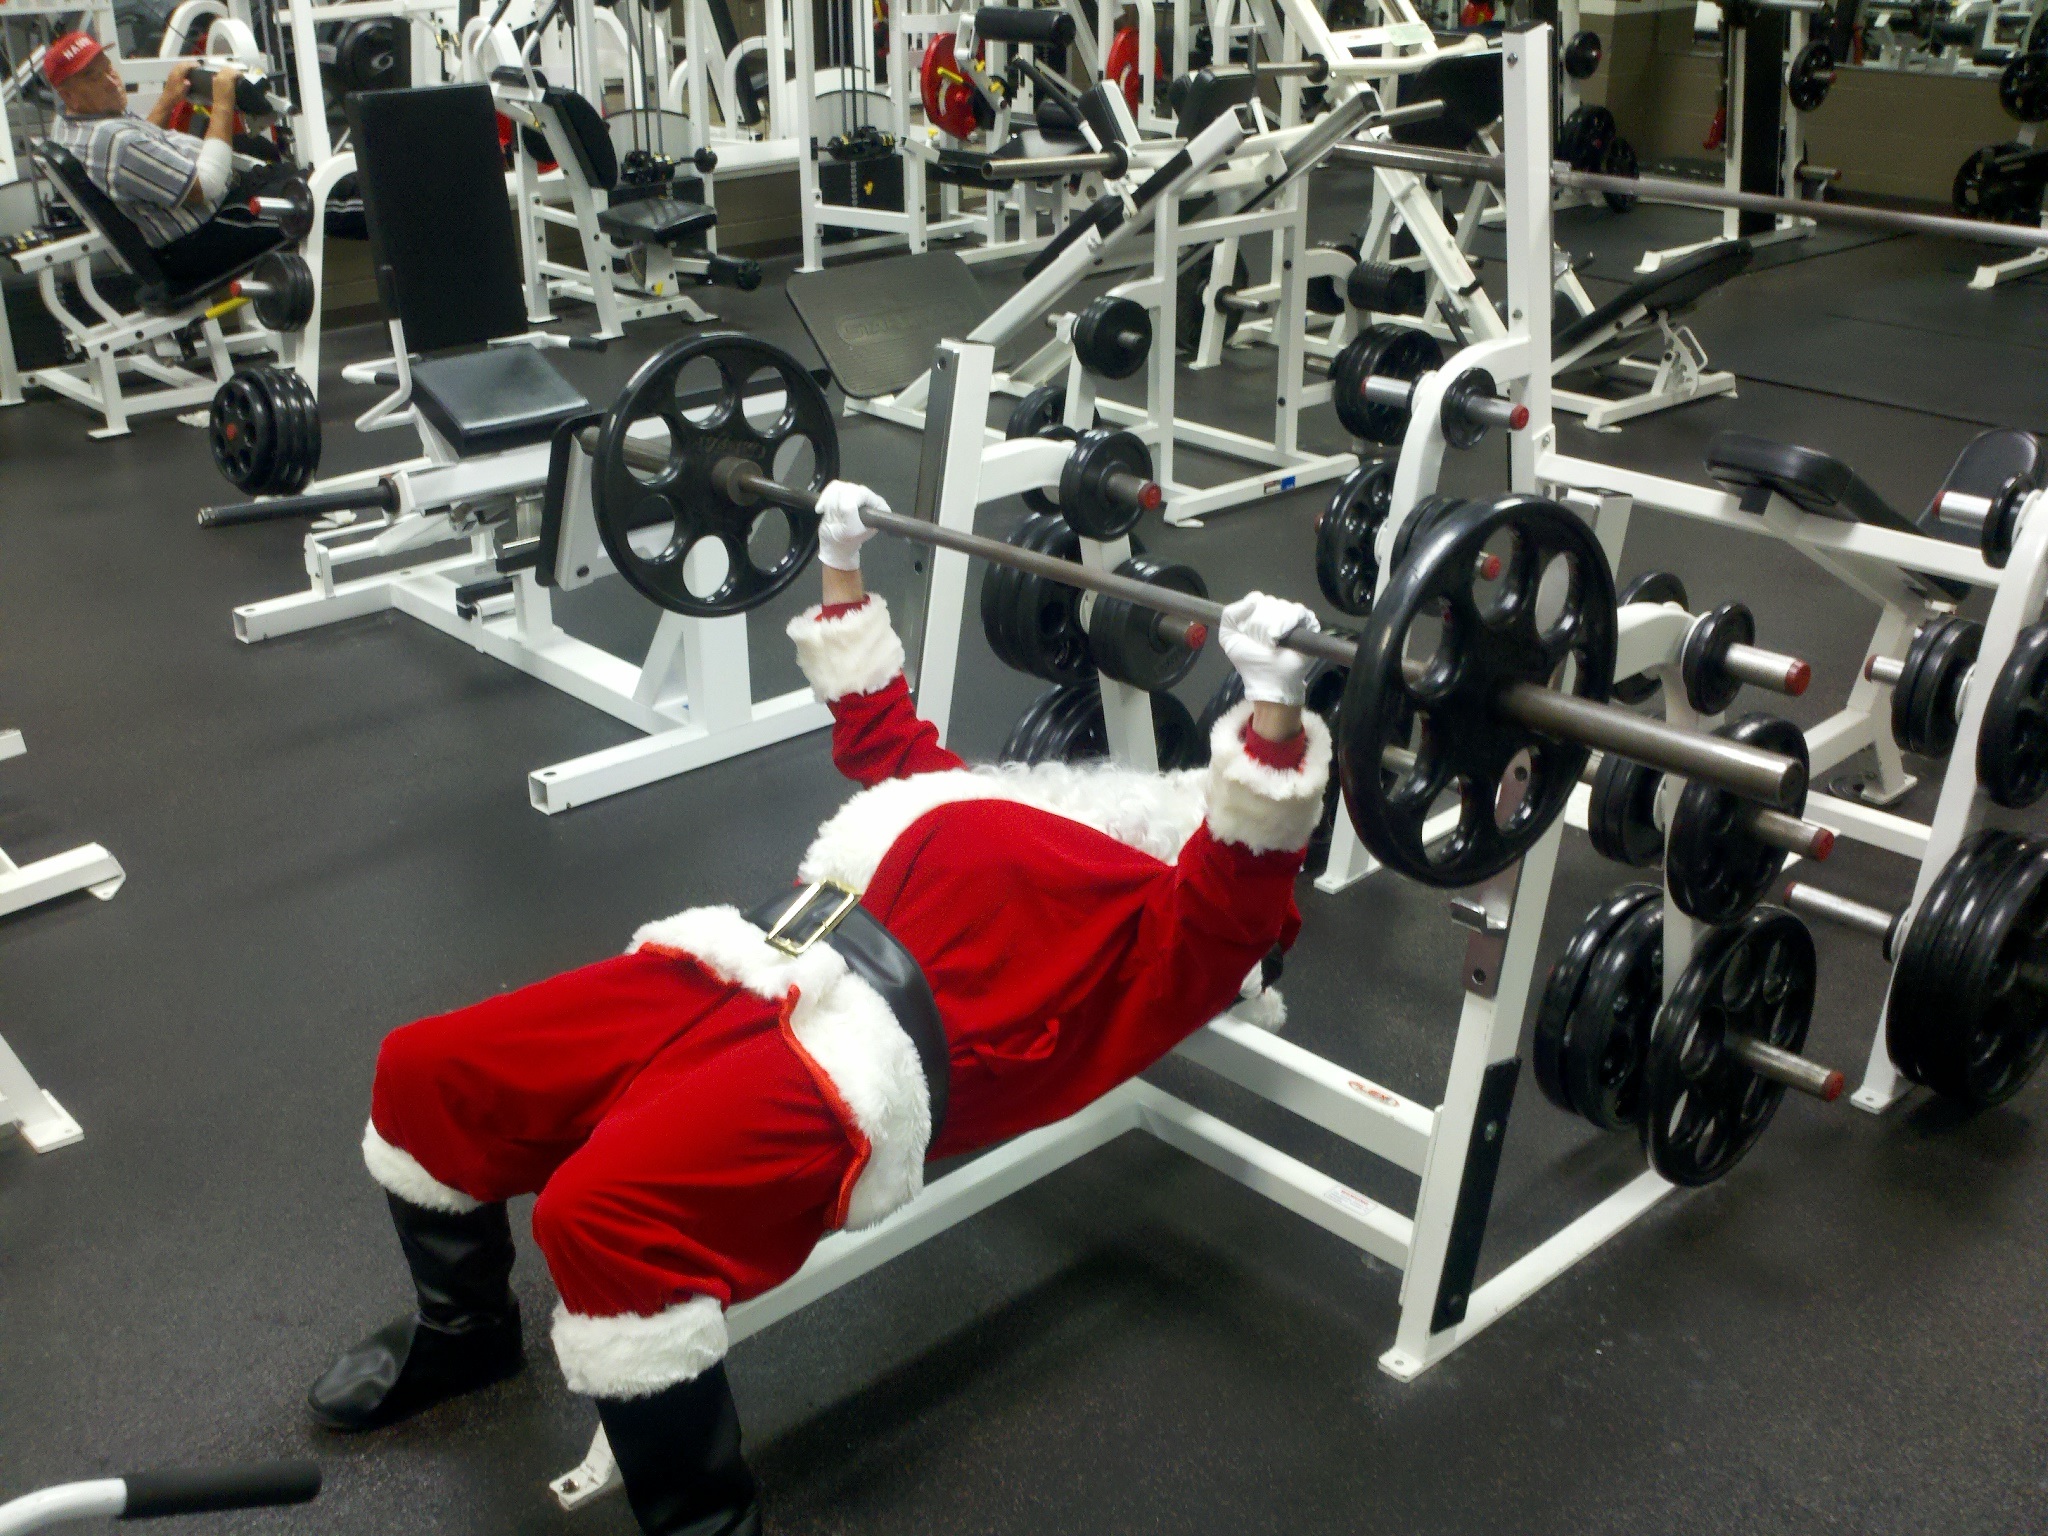 Santa Lifting, Claus, Exercise, Fit, Fitness, HQ Photo